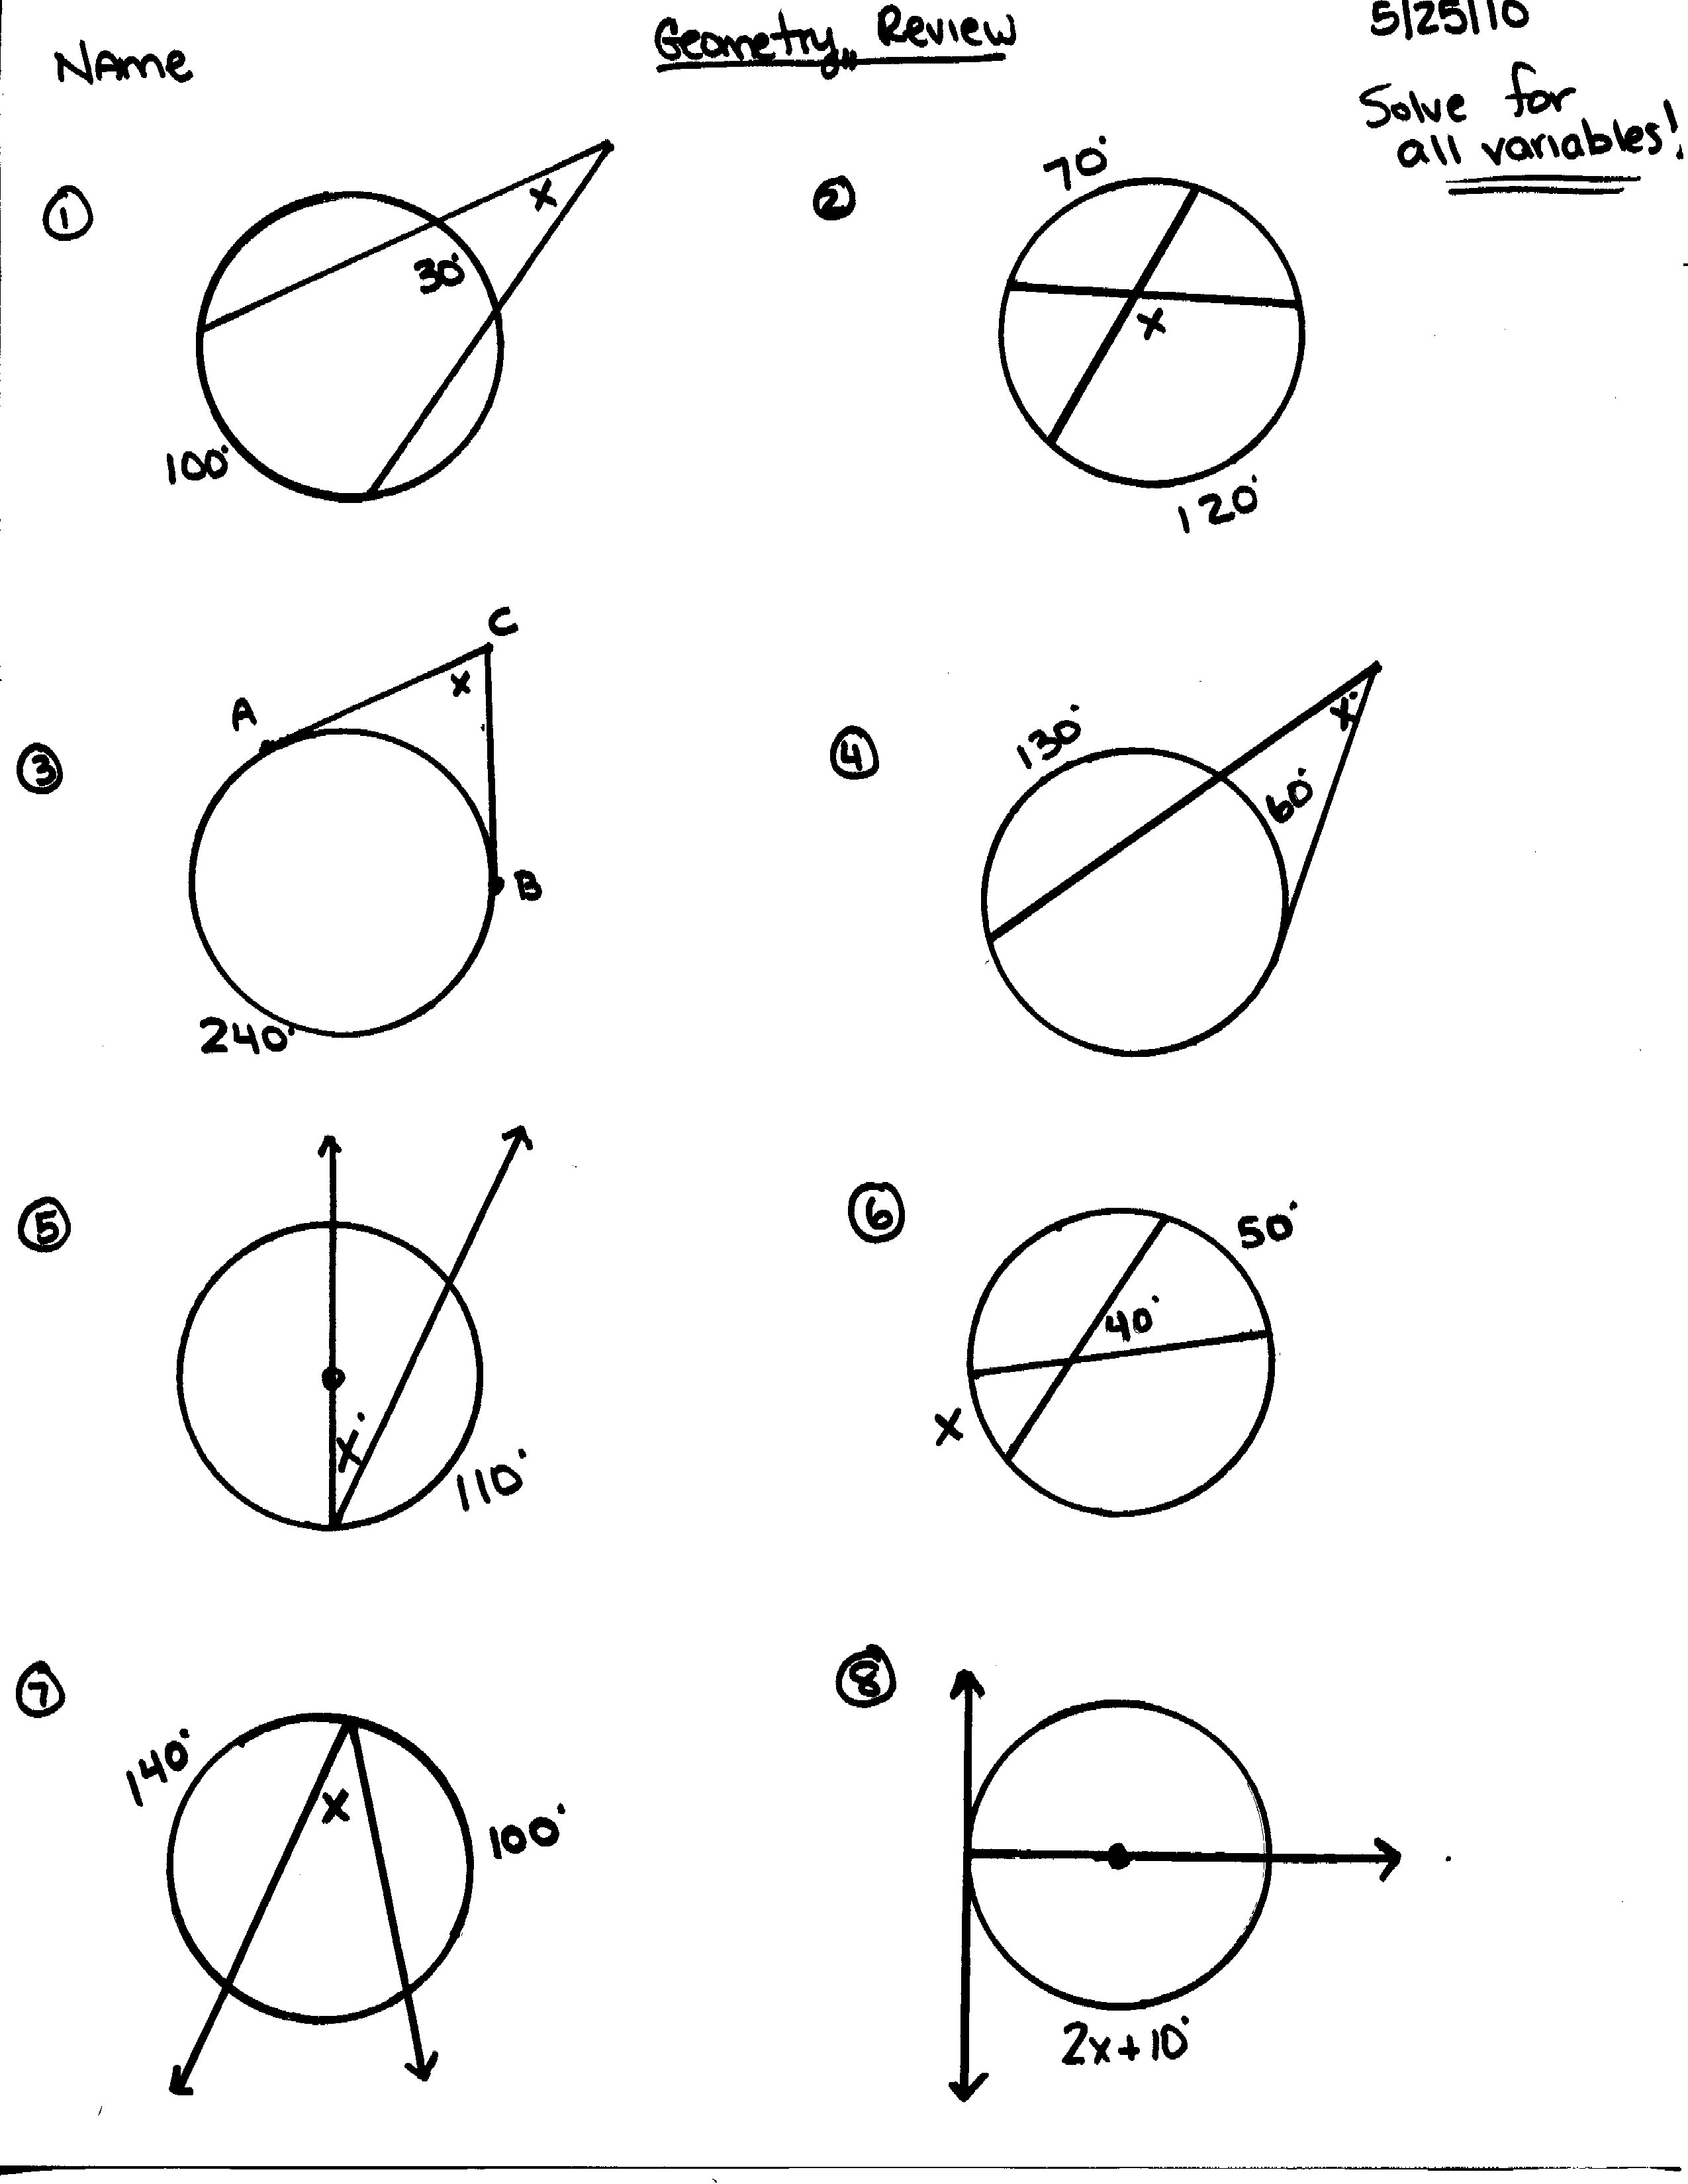 Circle Theorems Worksheet and Answers